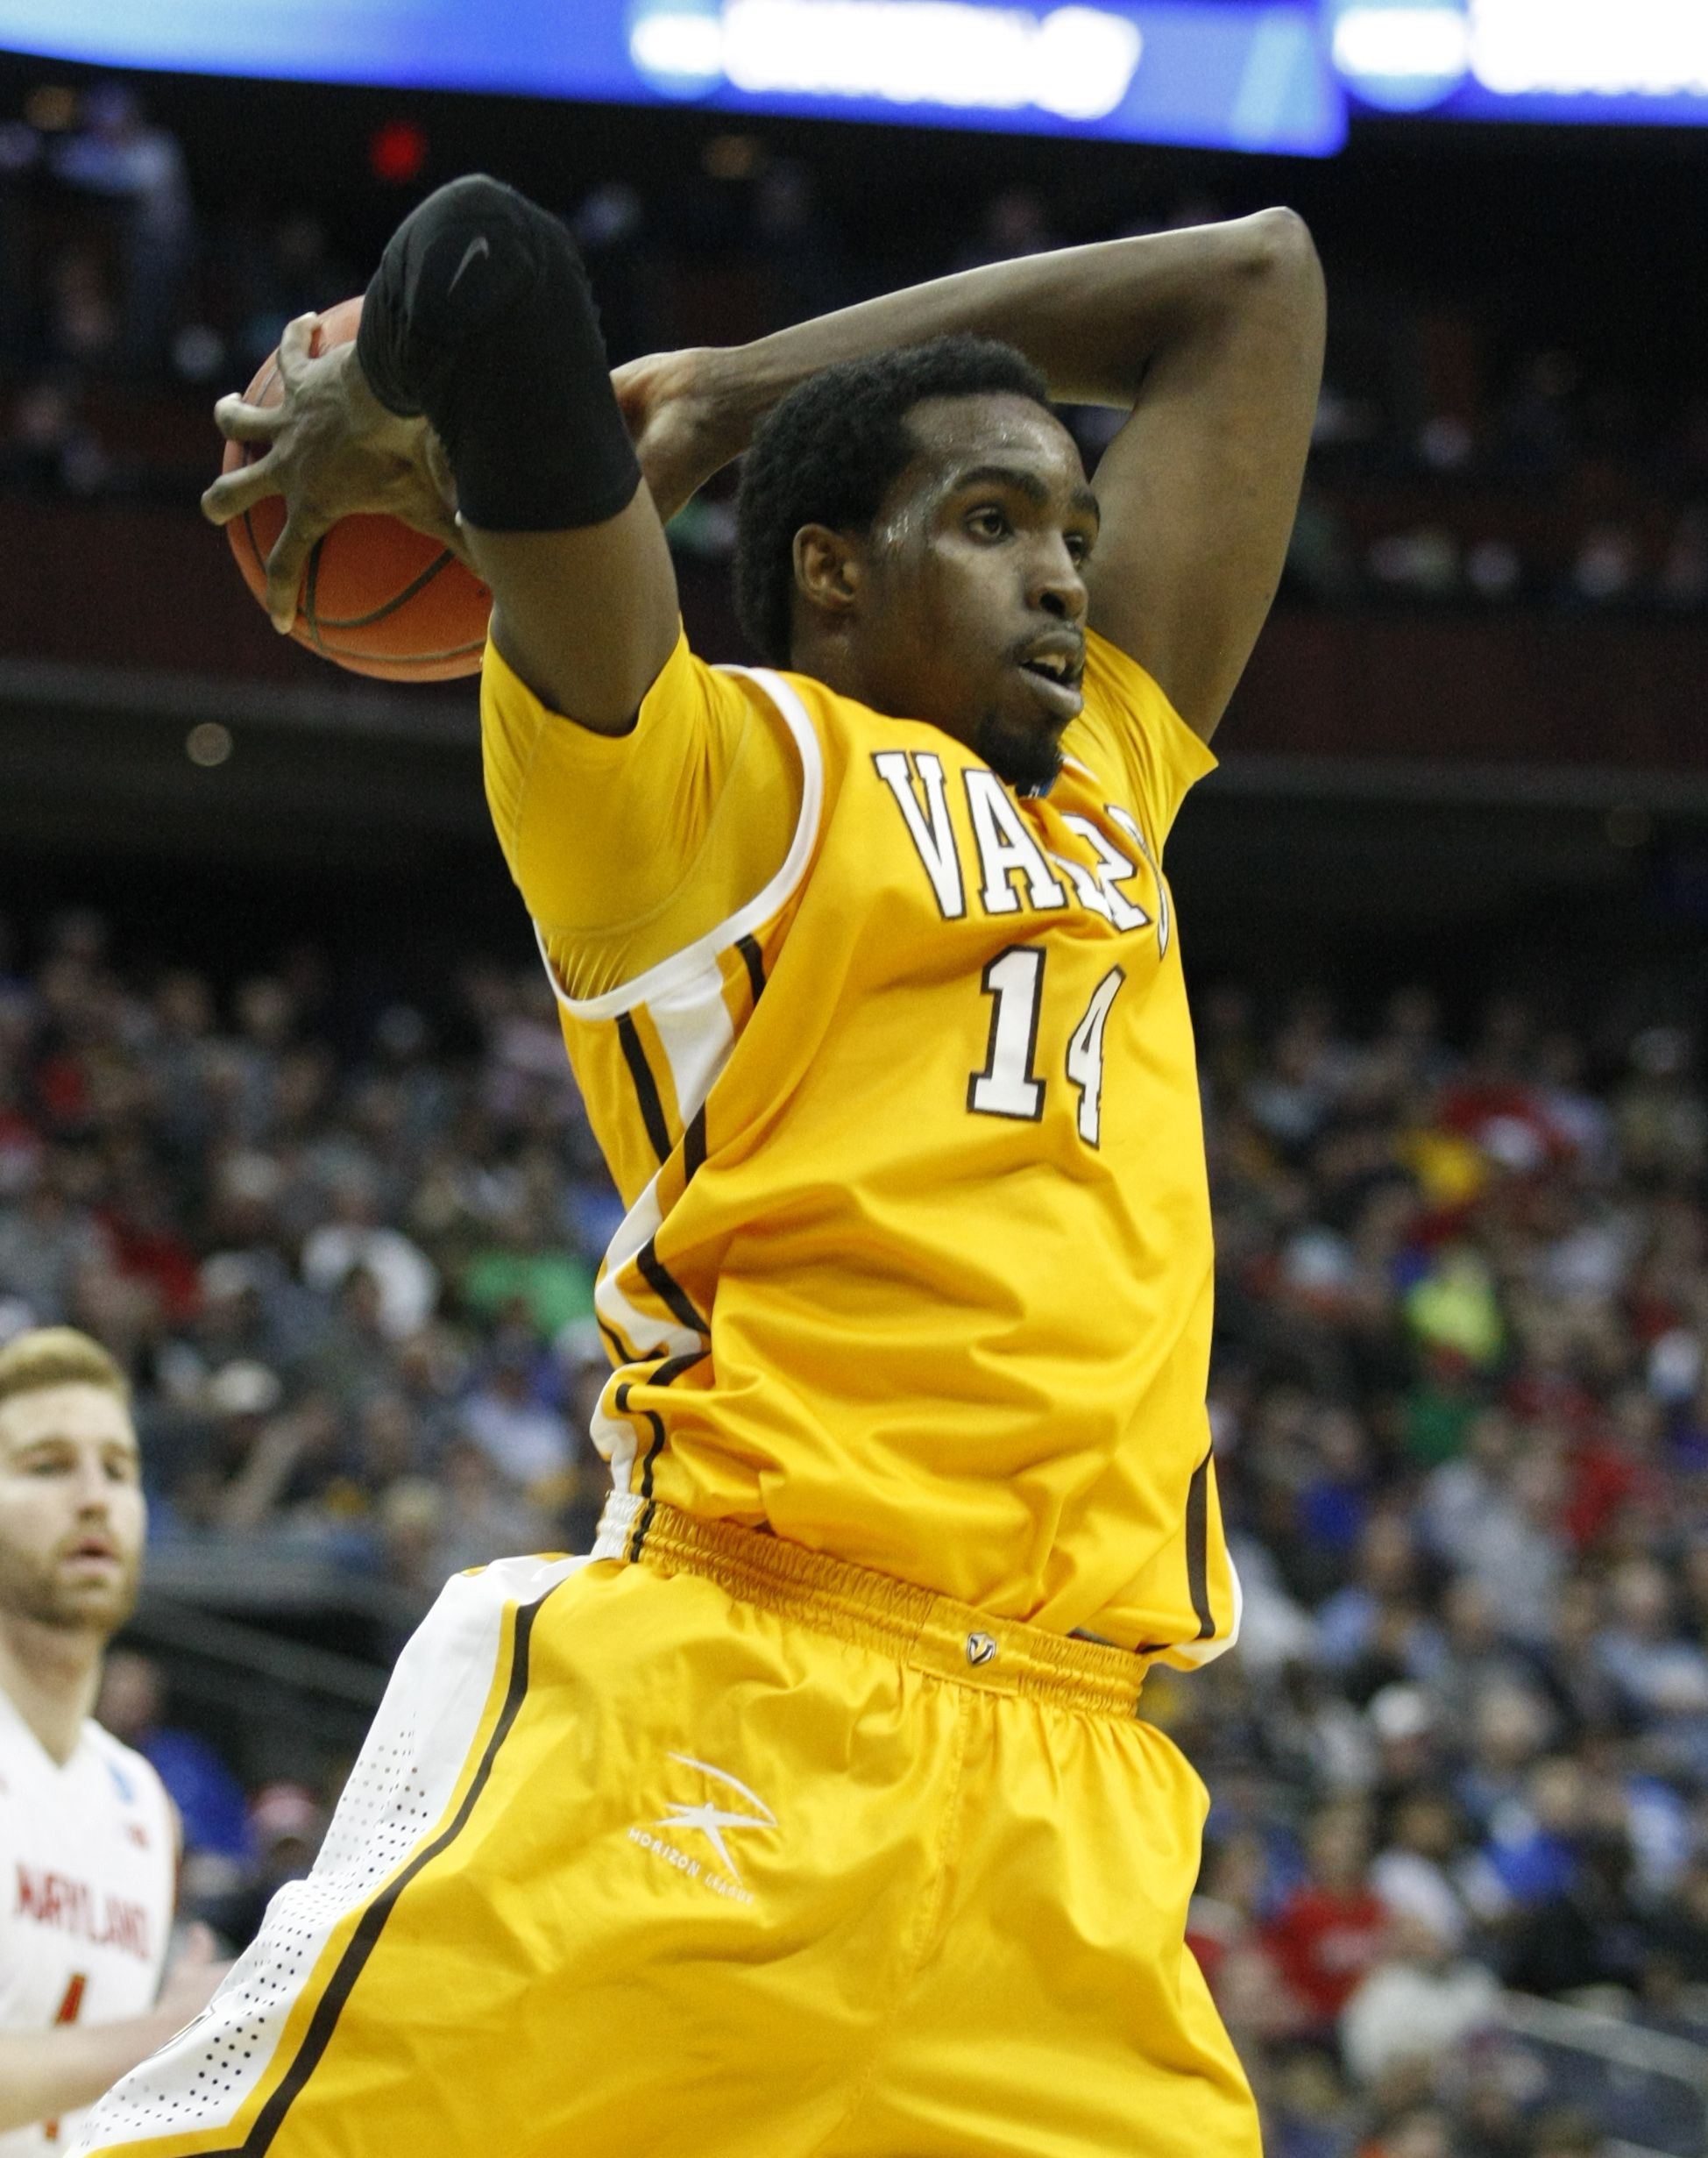 Valparaiso's defense paved the way to victory, led by Vashil Fernandez and his 6 blocks.